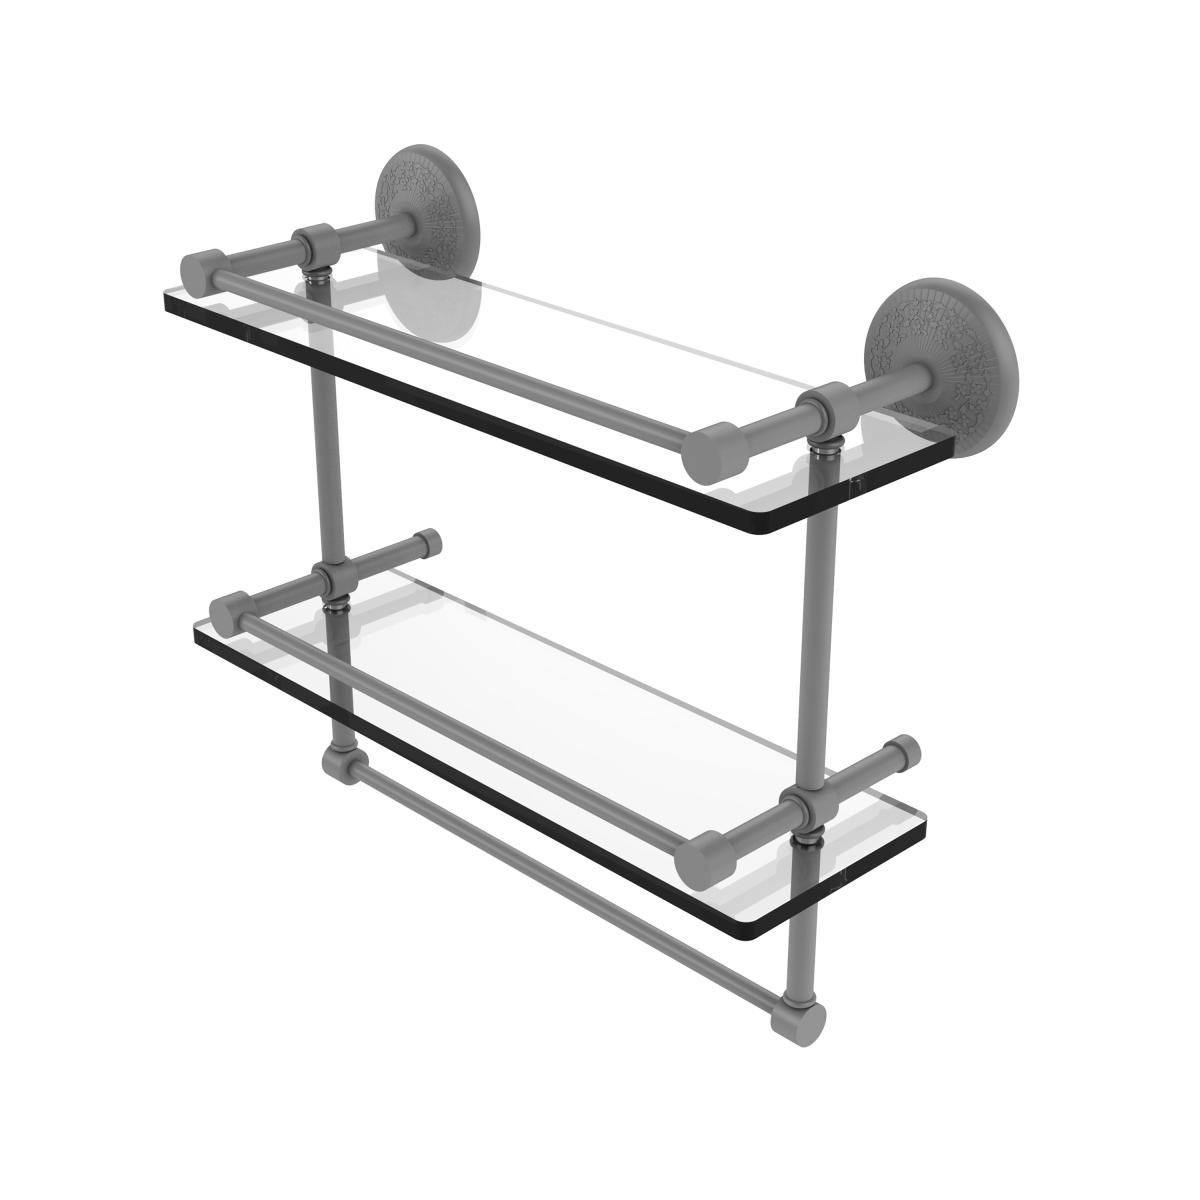 Allied Brass MC-2TB-16-GAL-GYM 16 in. Monte Carlo Collection Gallery Double Glass Shelf with Towel Bar, Matte Gray